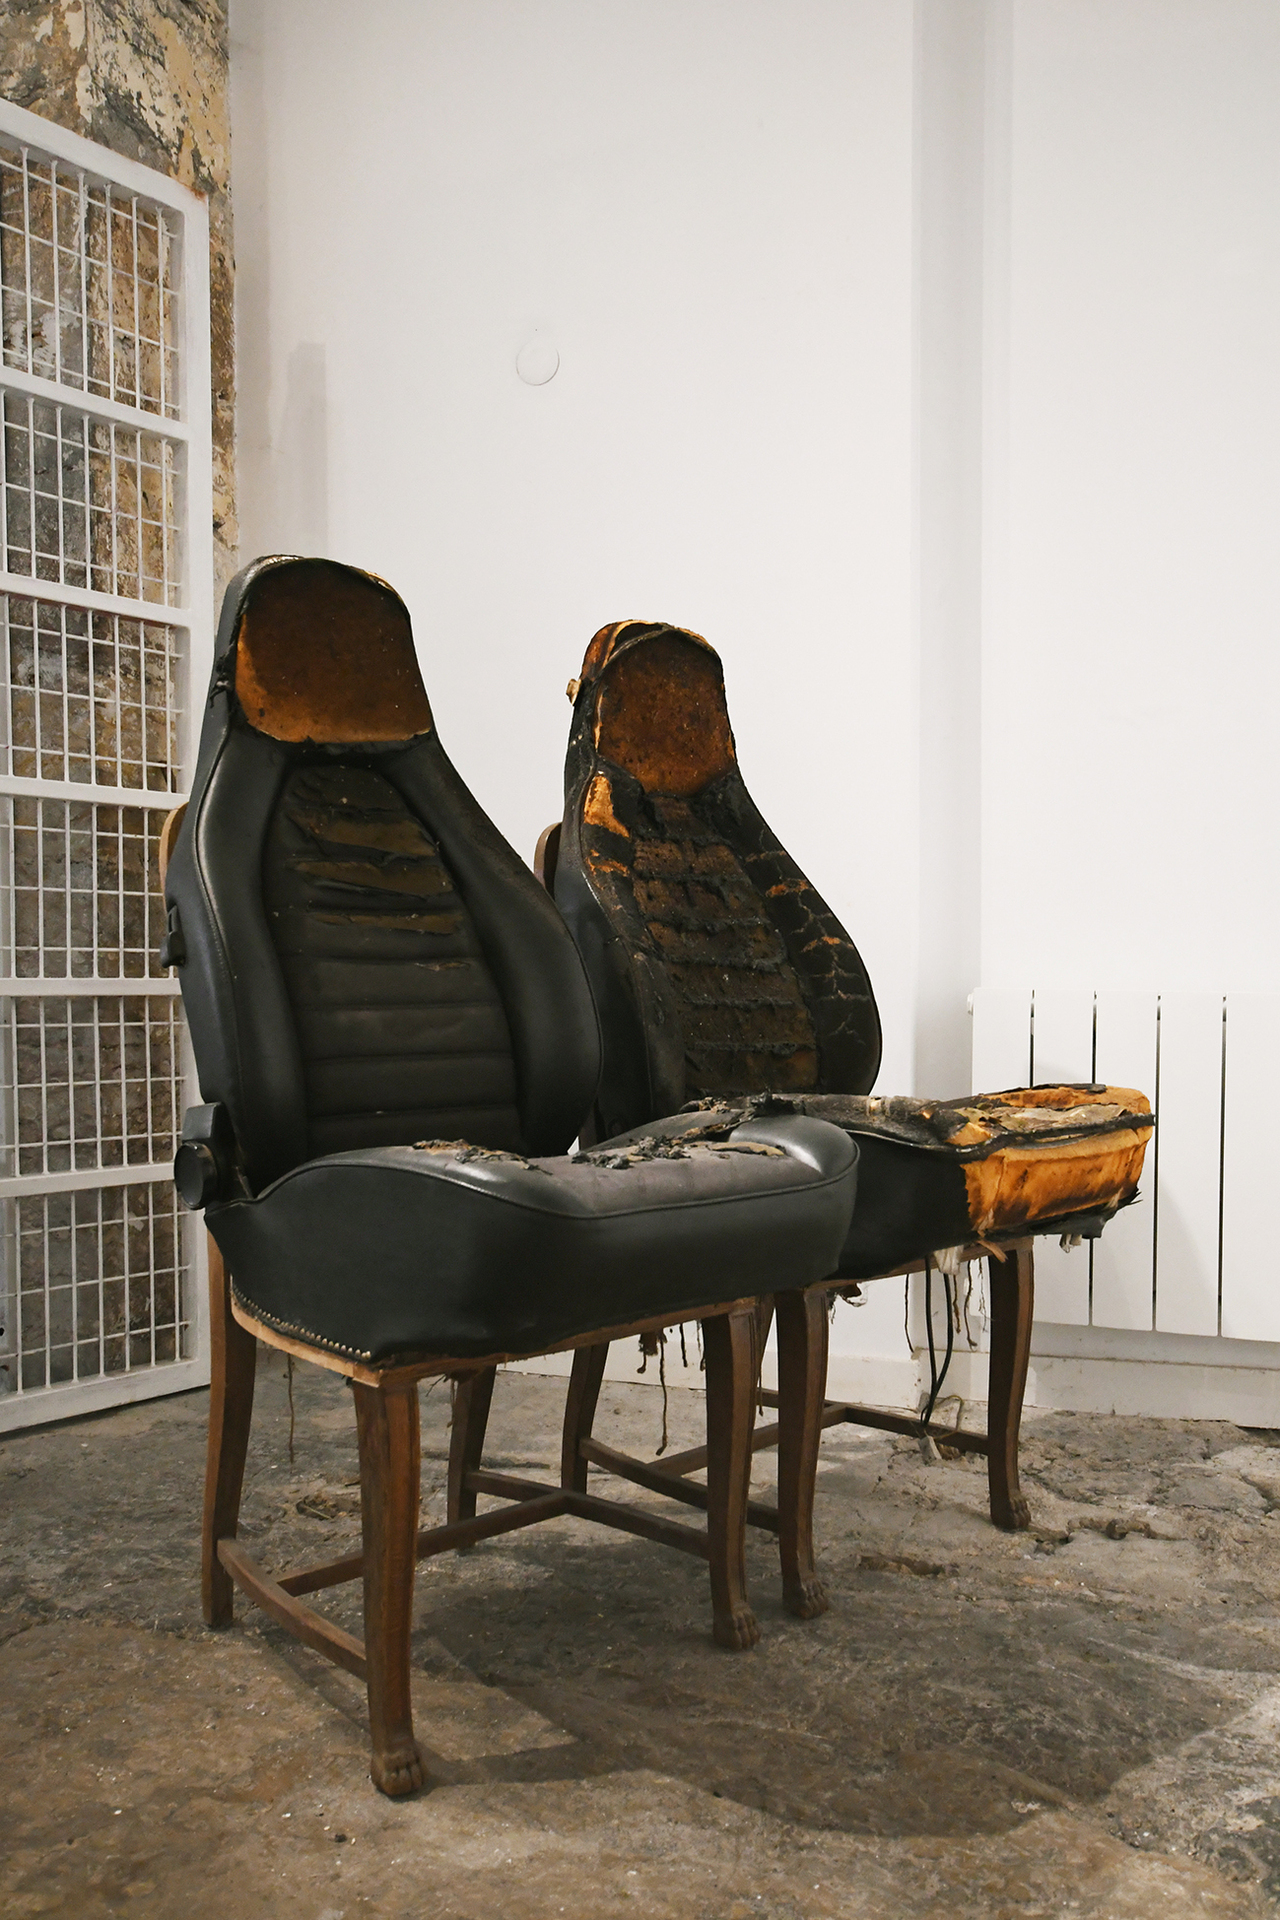 Together, 130 x 62 x 65 cm each, seats from a crashed Porsche on old chairs, unholster nails, 2021